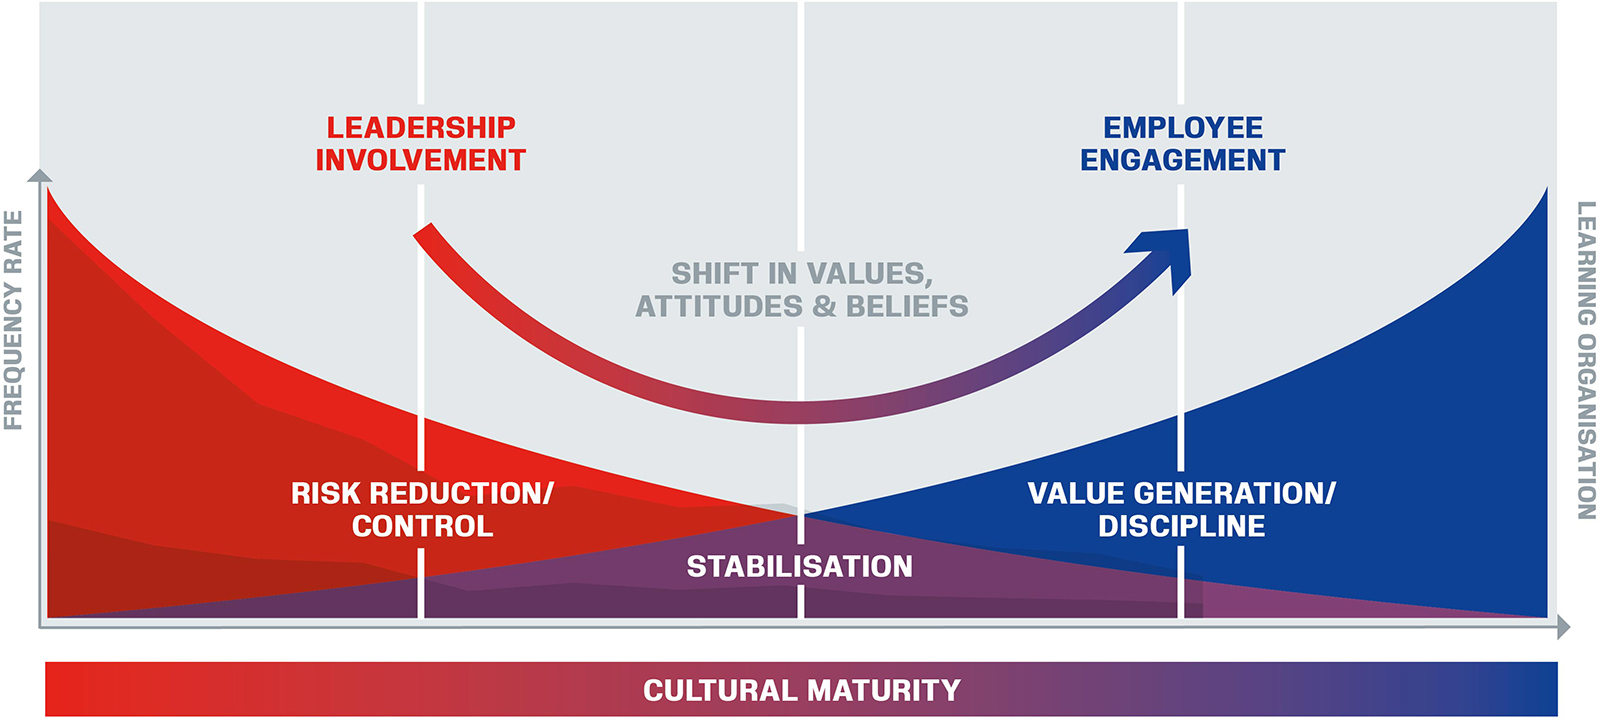 „The graphic shows how cultural maturity is used at KAEFER as a general benchmark for the development of the HSE culture. At the beginning, the focus was on controlling and minimising risks, from leadership to employees. This was followed by a stabilisation phase in which progress was strengthened. A curve shows that there was a turnaround in values, attitudes and beliefs. The aim of this was to form a learning network based on the commitment of the employees.“